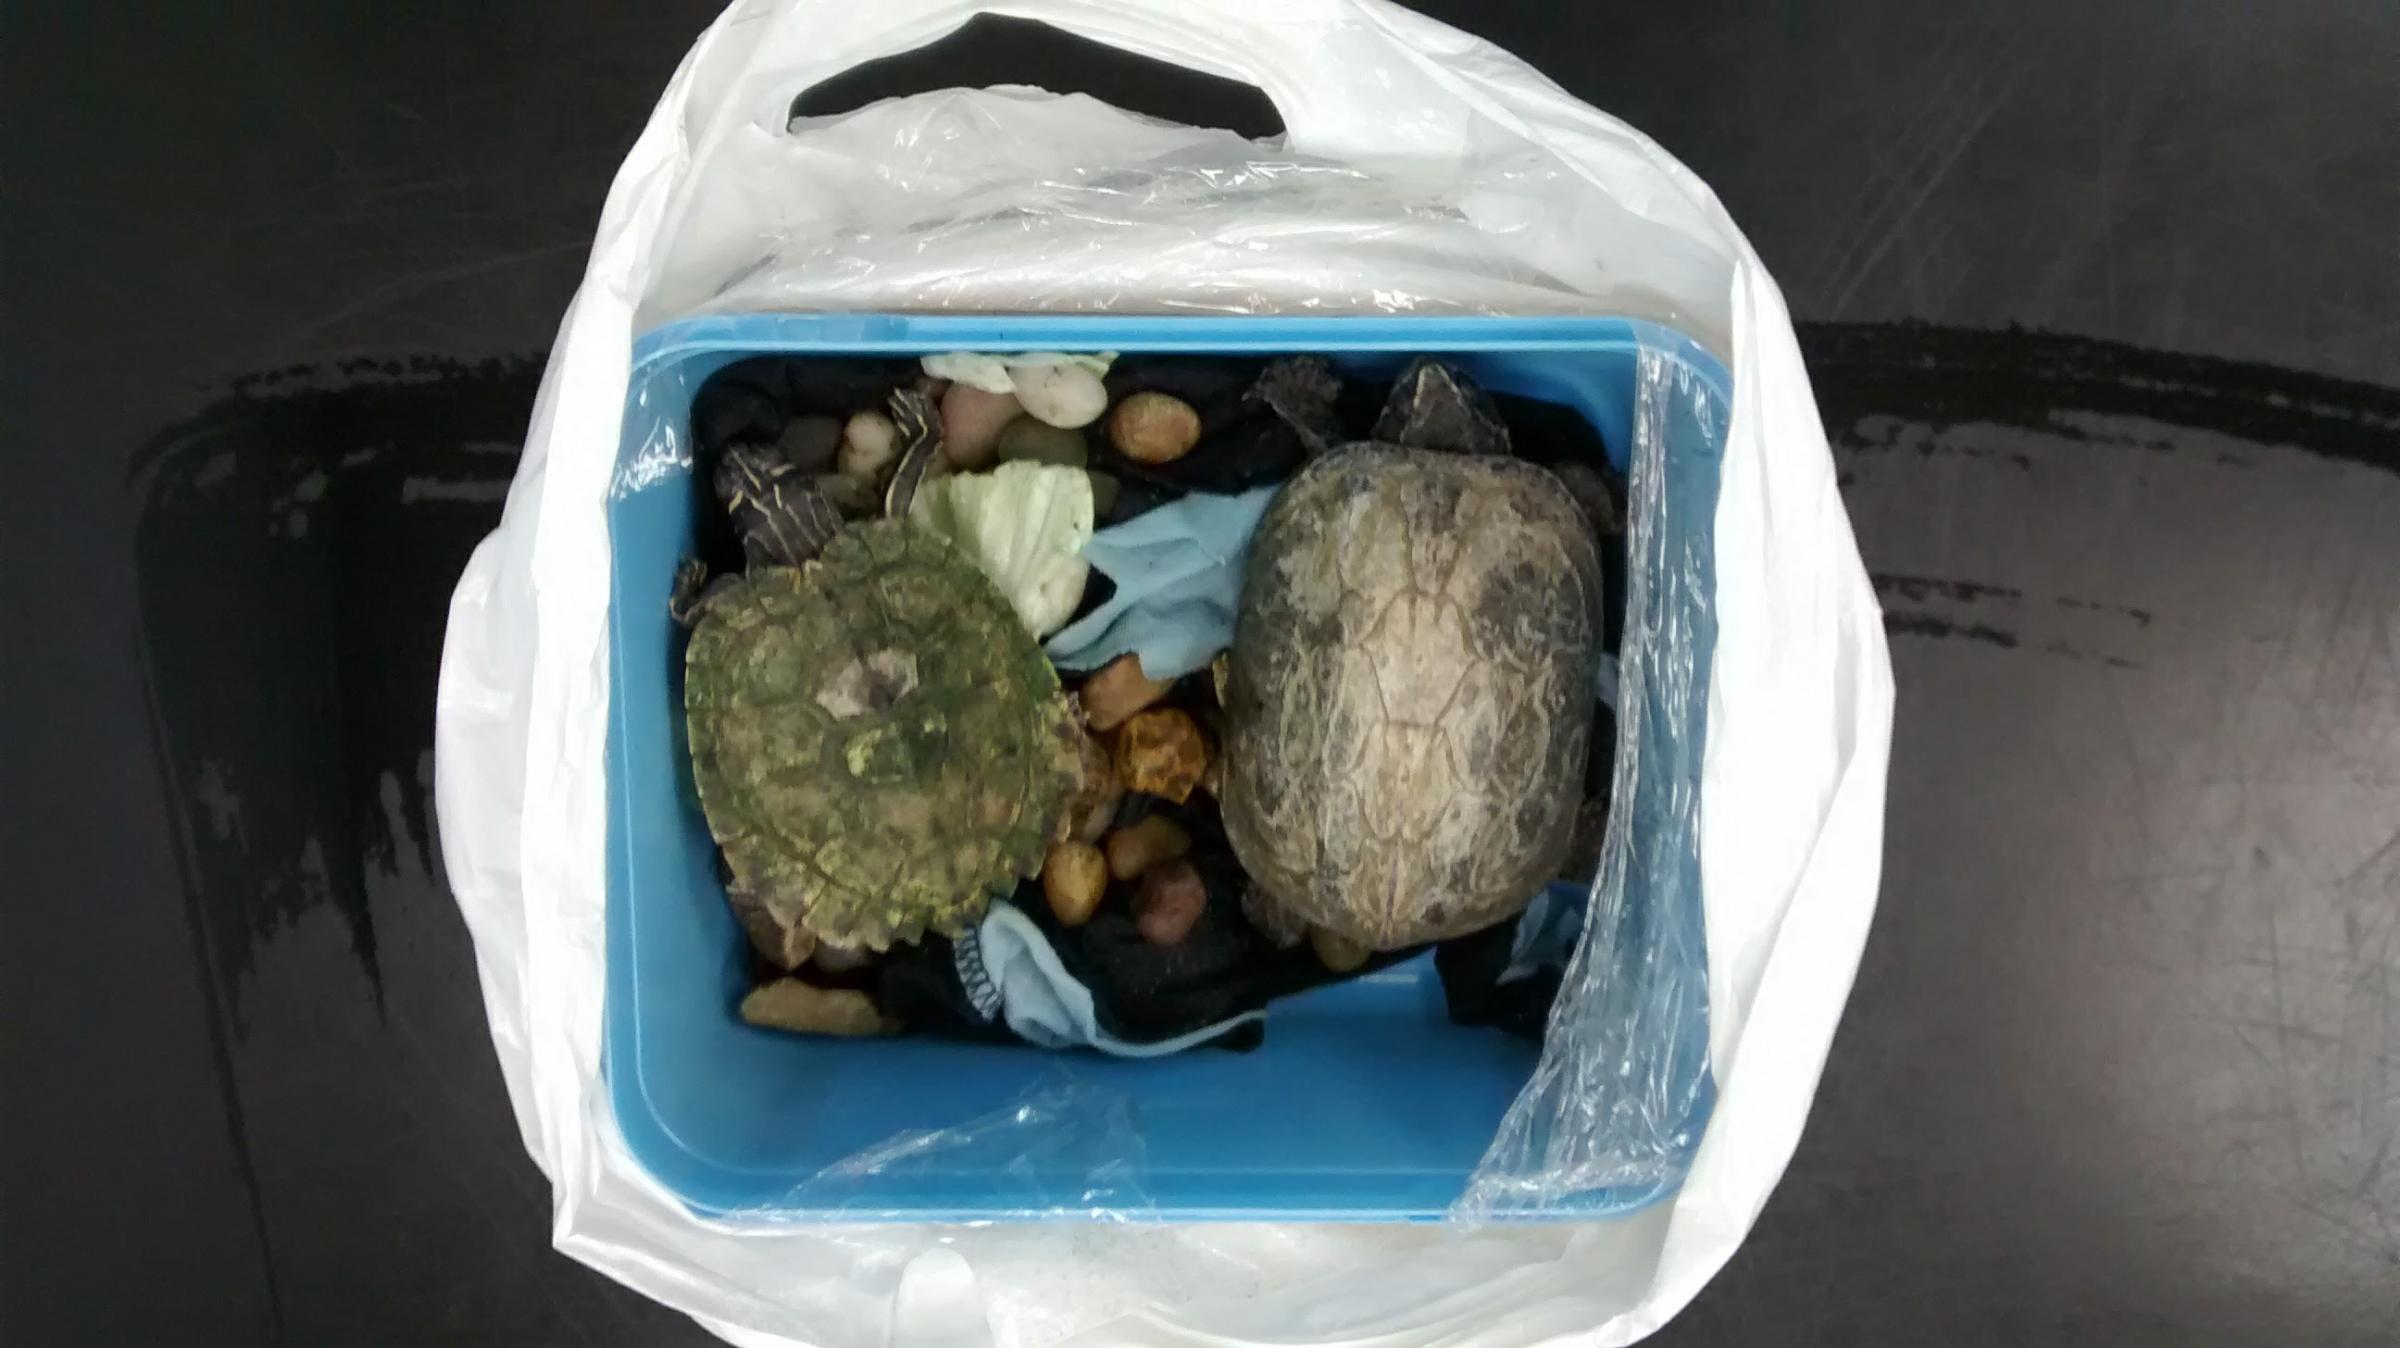 Terrapin and turtle found dumped in McDonalds in ice cream tub - one dead after maltreatment